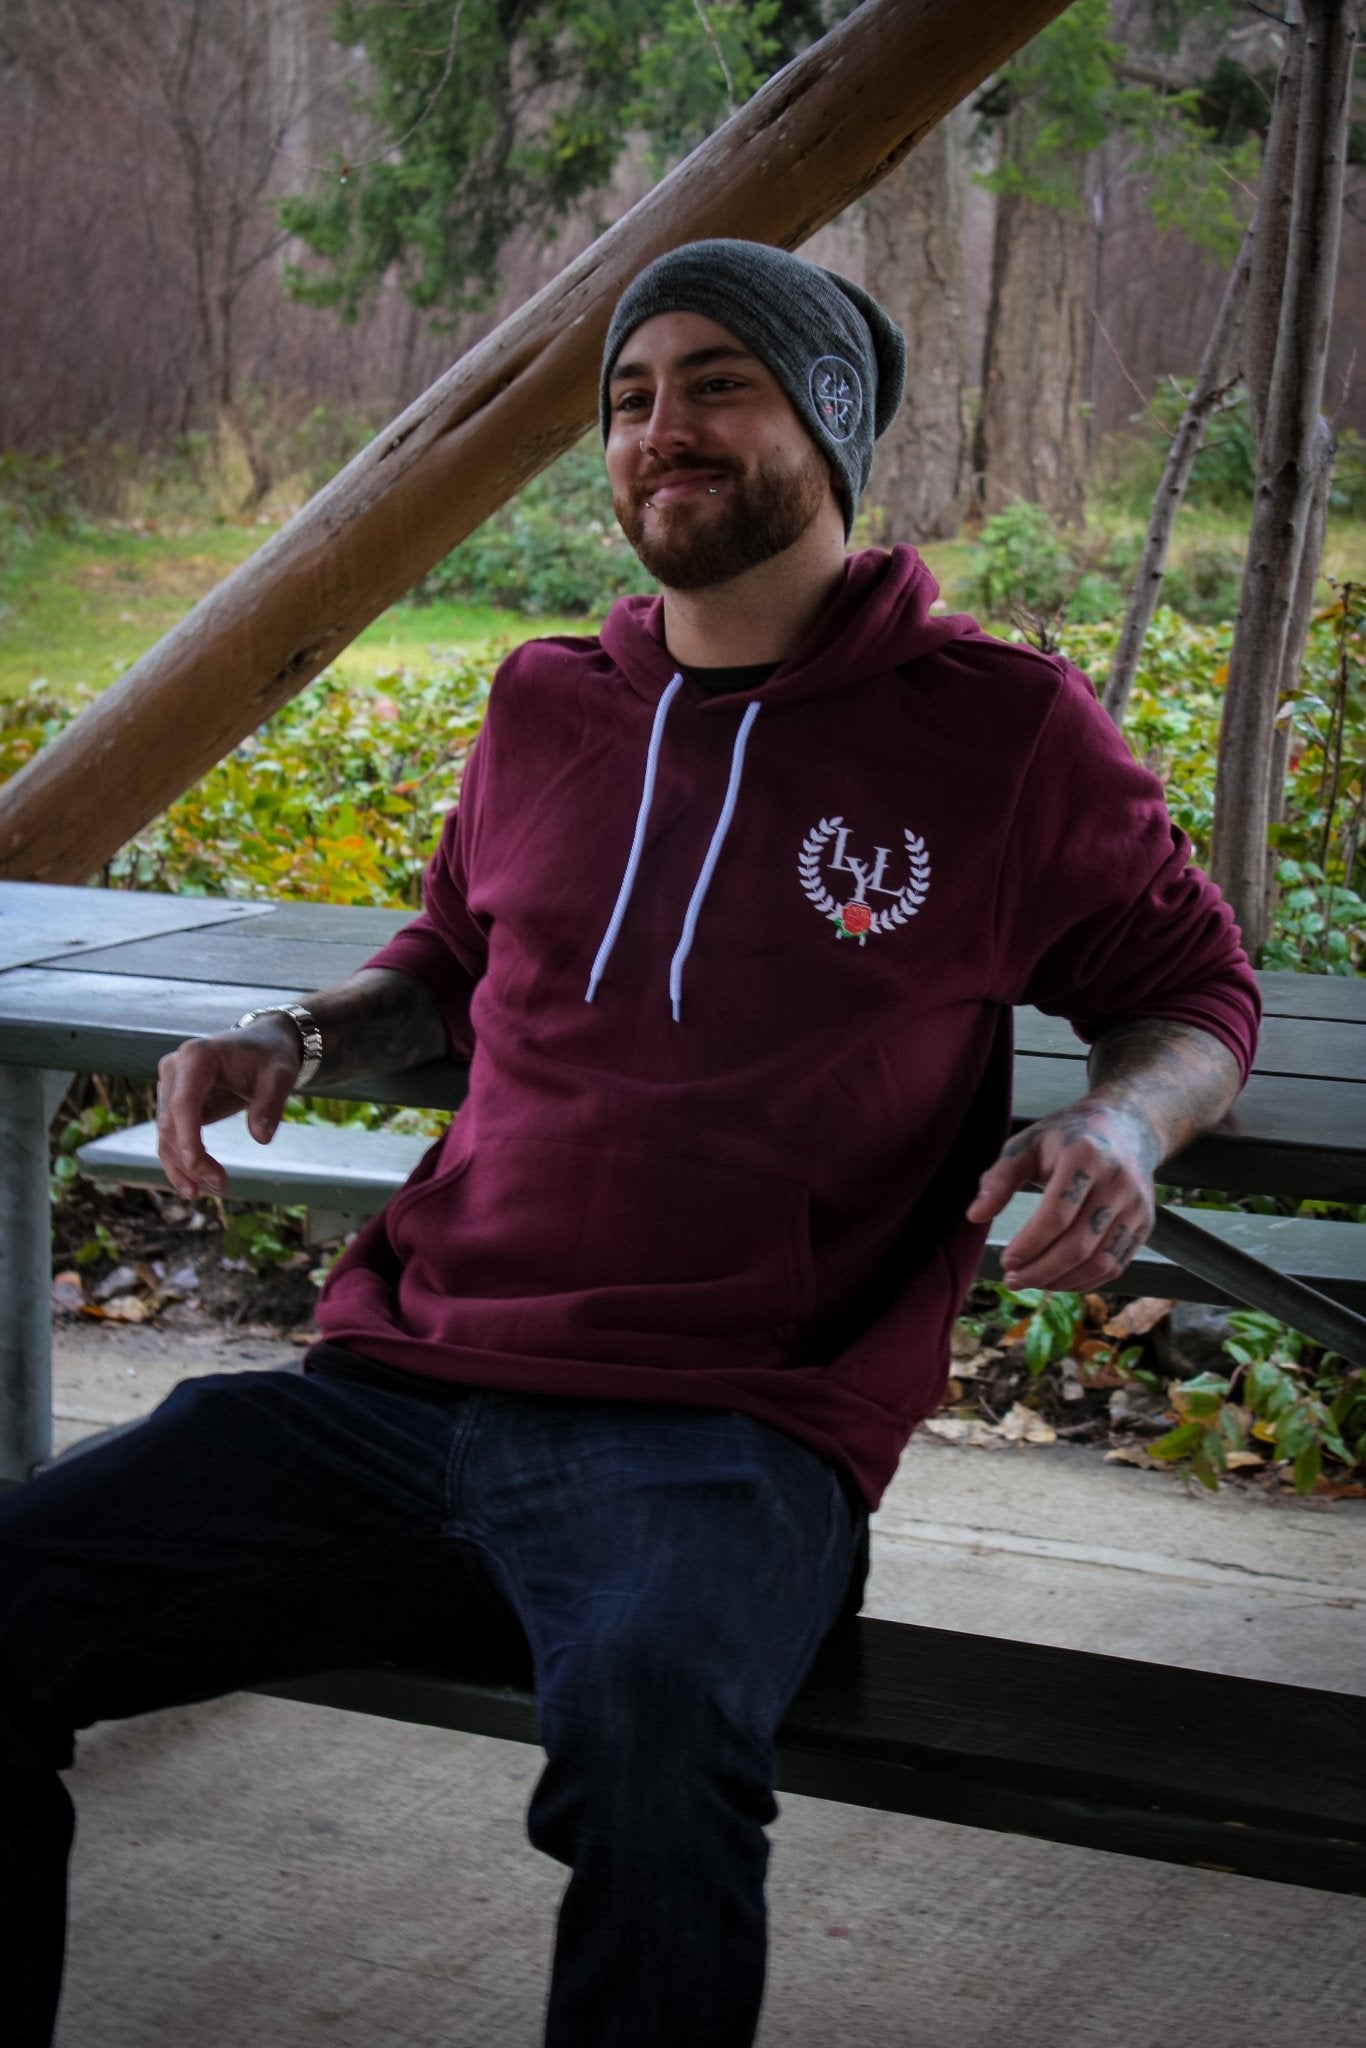 Men's LyL & Wreath Hoodies | Leave Your Legacy Clothing